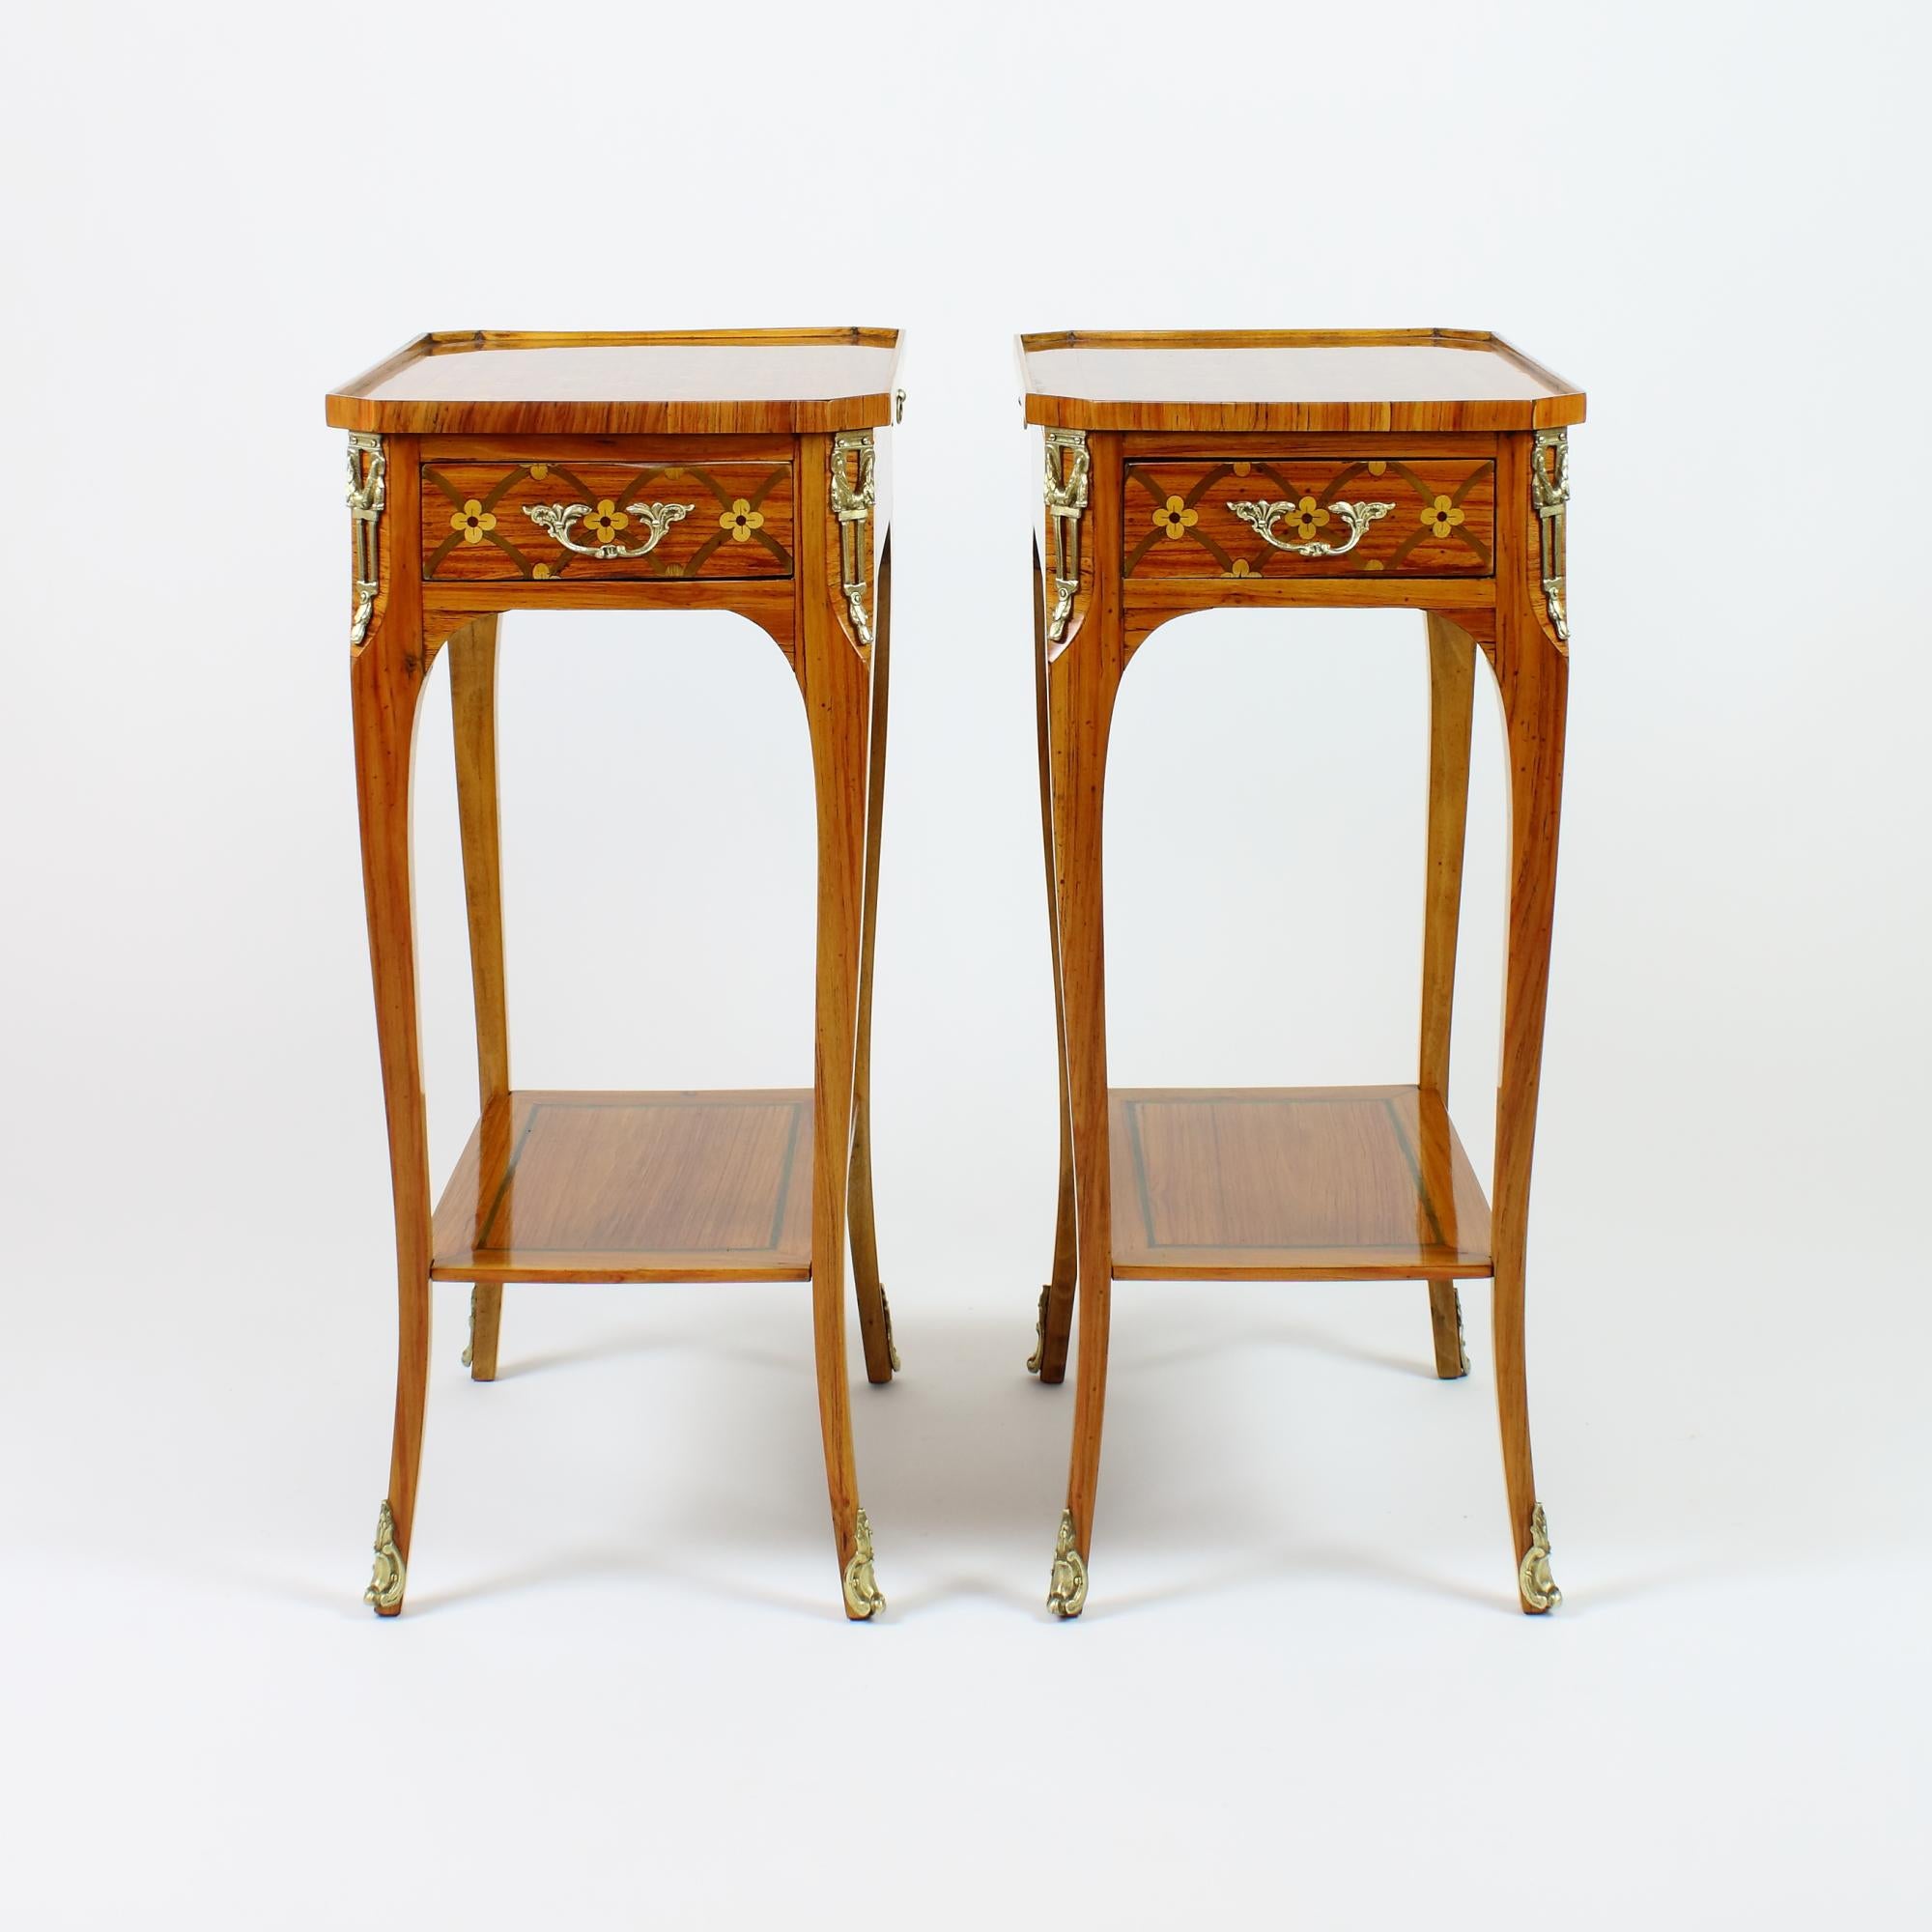 Pair of 19th/20th Century Louis XVI Marquetry Side Tables /Lady's Writing Tables 1